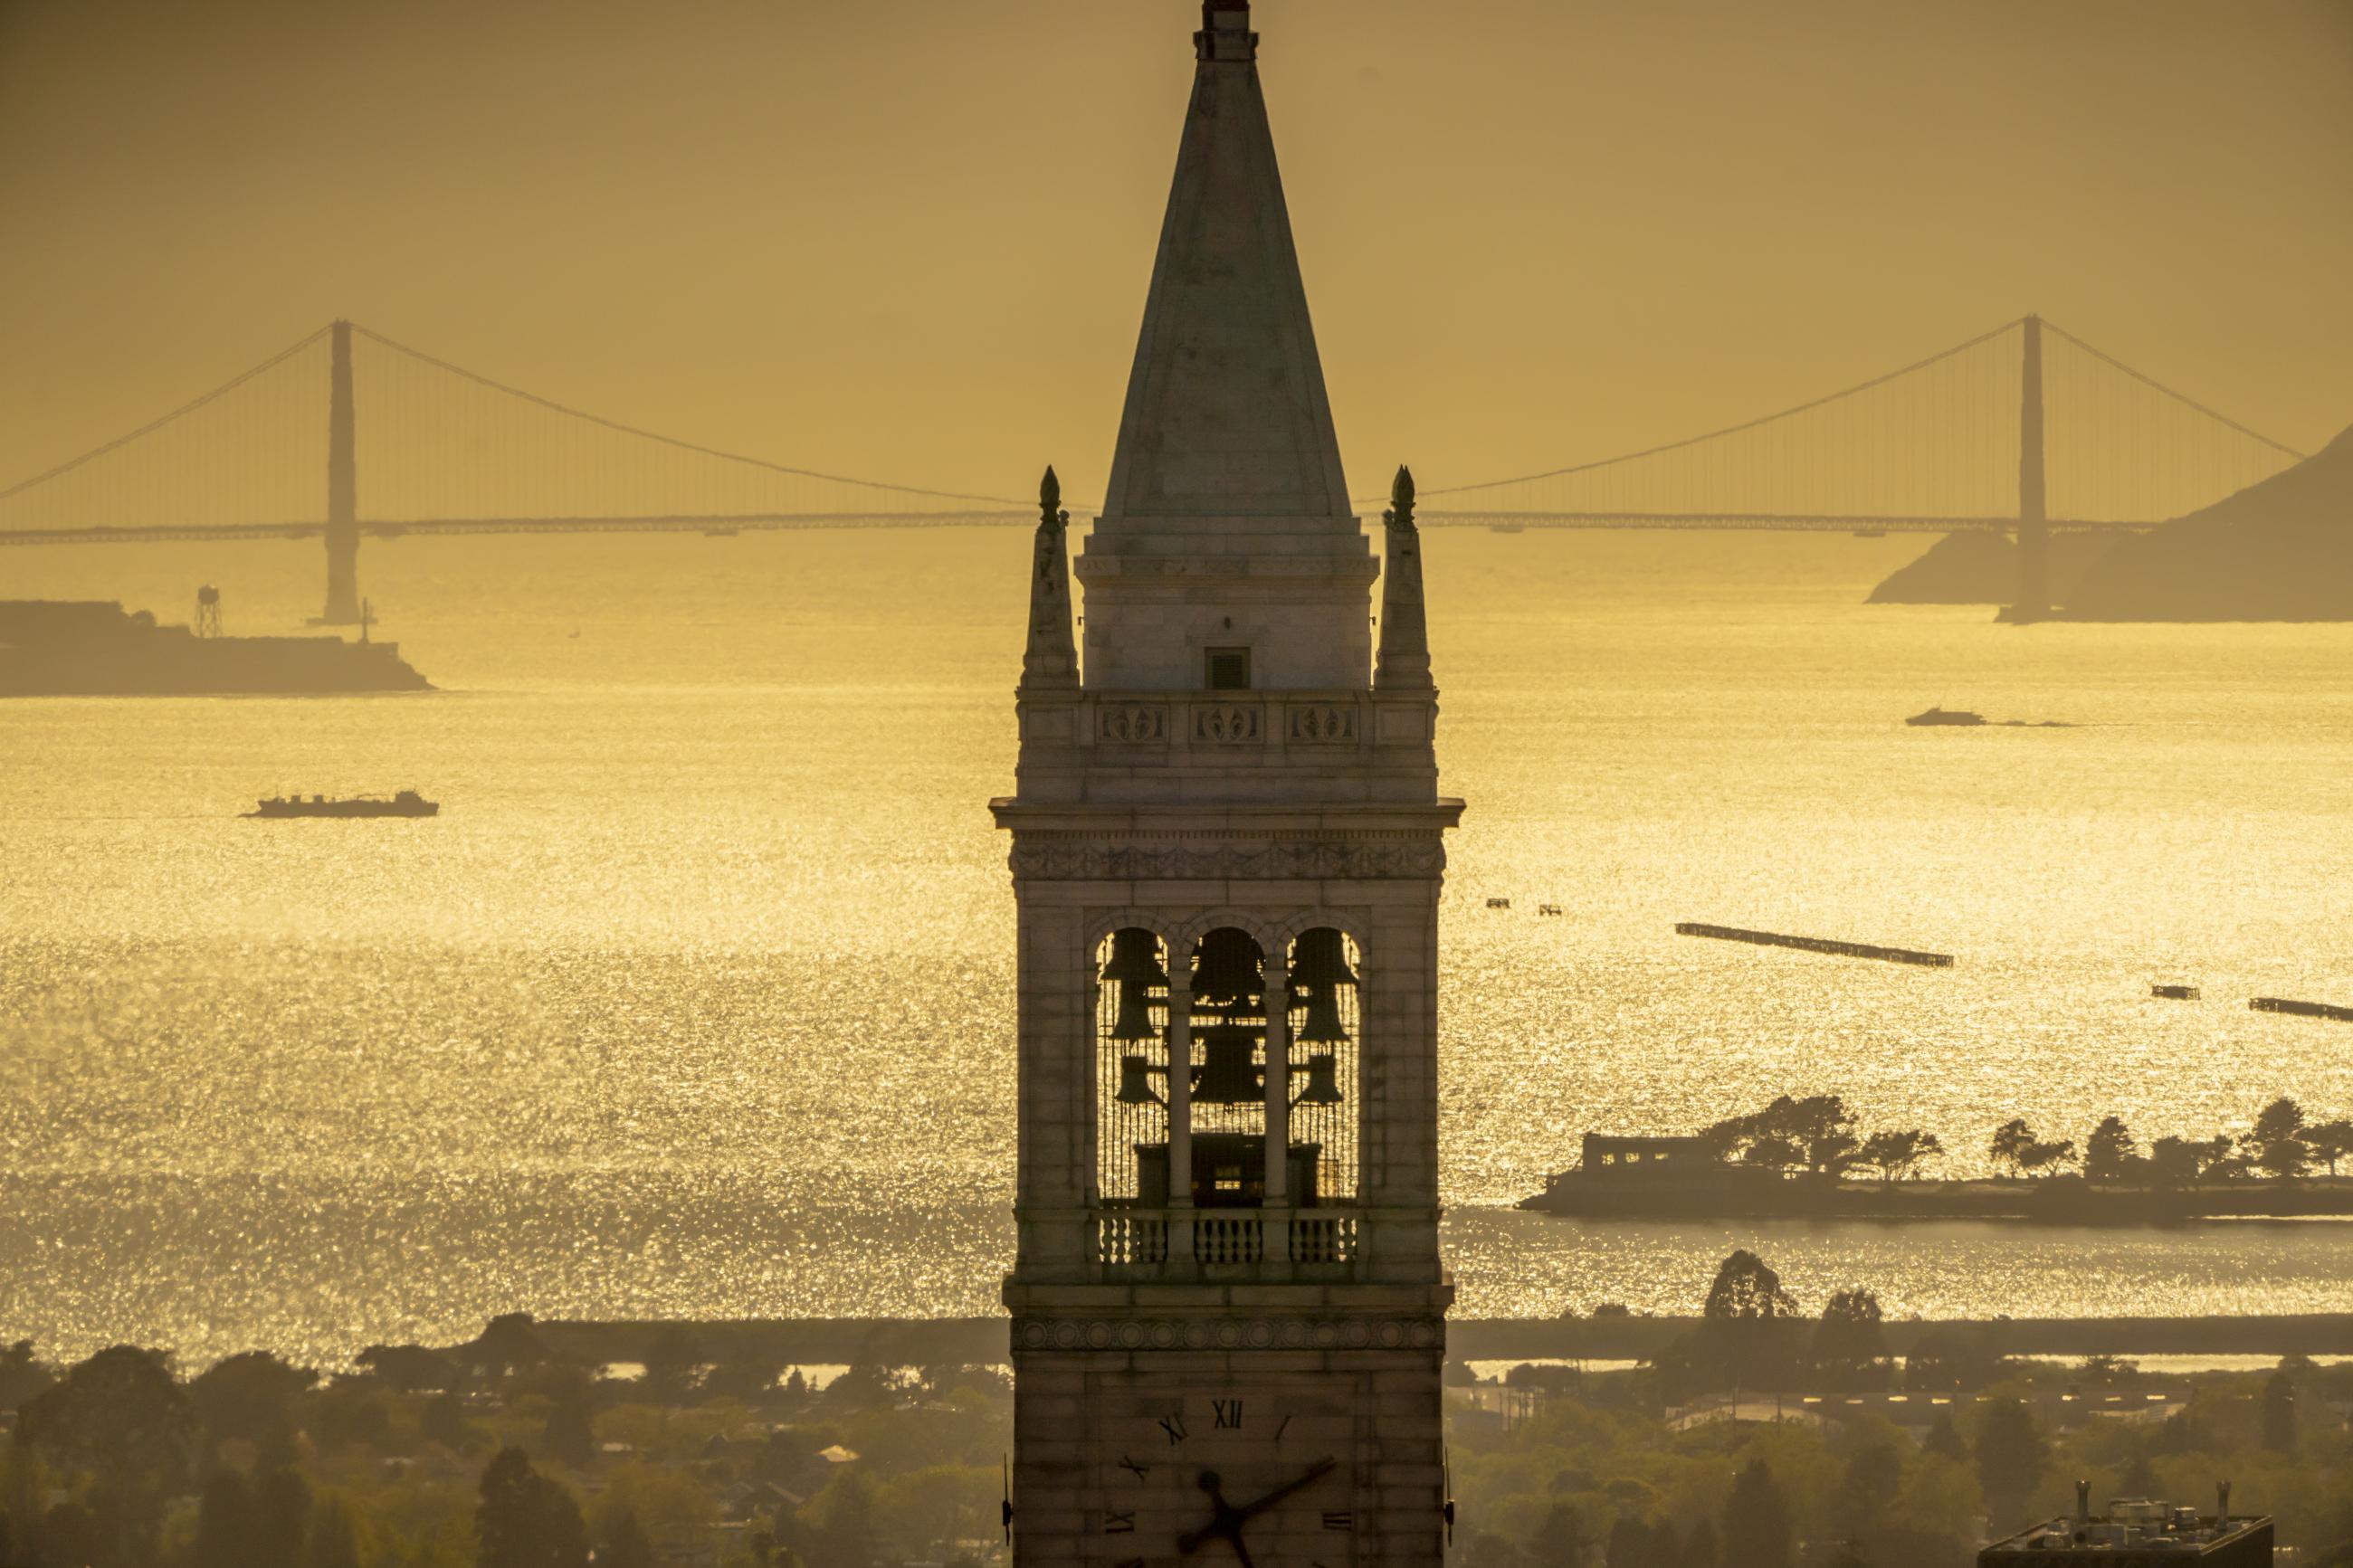 UC Berkeley's Campanile with a golden sunrise over the bay in the background. (Photo /Adam Lau)